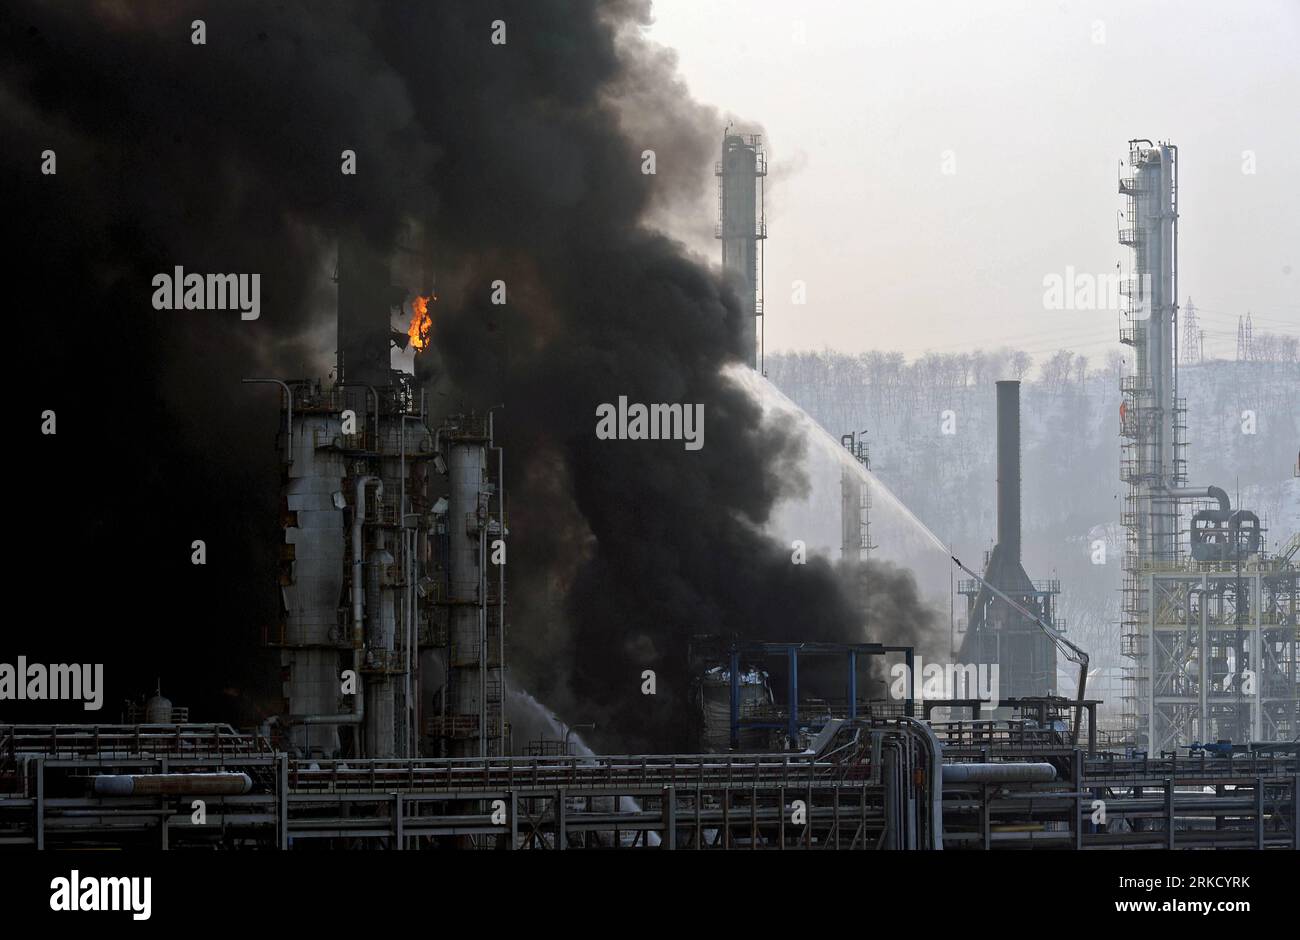 Bildnummer: 54830021  Datum: 19.01.2011  Copyright: imago/Xinhua FUSHUN, Jan. 19, 2011 (Xinhua) -- Smoke rises from the site where an explosion occurred at a refinery of Fushun Petrochemical Company in Fushun, northeast China s Liaoning Province, Jan. 19, 2011. Firefighters have brought the fire under control, eliminating the possibility of secondary explosions. No casualties have been reported so far. (Xinhua/Yao Jianfeng) (hdt) CHINA-FUSHUN-OIL REFINERY-EXPLOSION (CN) PUBLICATIONxNOTxINxCHN Wirtschaft Fabrik petrochemische Industrie Chemiefabrik Raffinerie Öl Ölraffinerie Explosion Unglück k Stock Photo